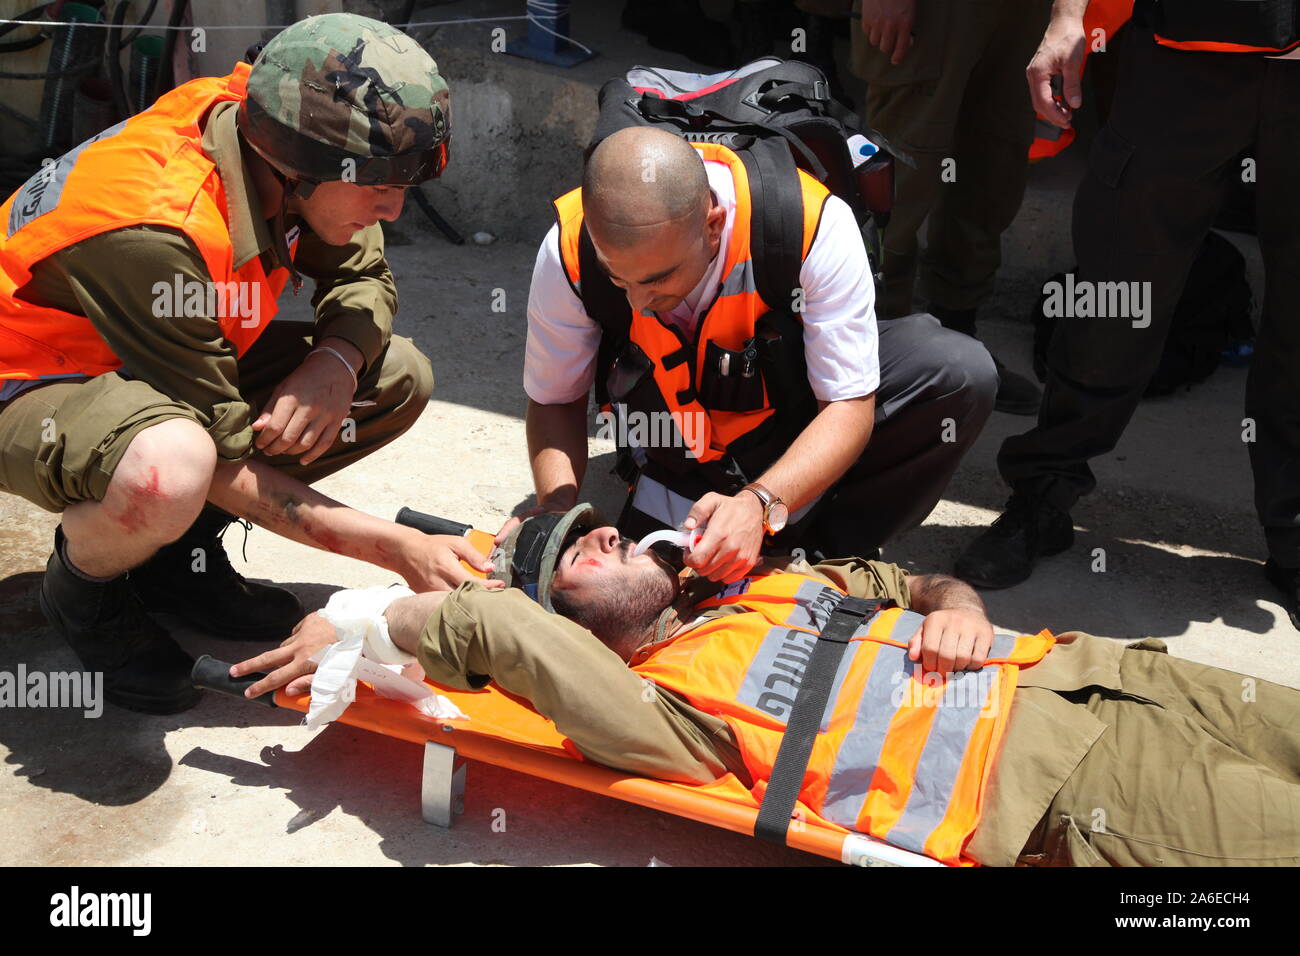 Paramedics treat rocket attack casualties in Carmel Prison, Israel, during simulation drill Turning Point 15. Emergency forces practice rescue and first aid treatment to injured Stock Photo